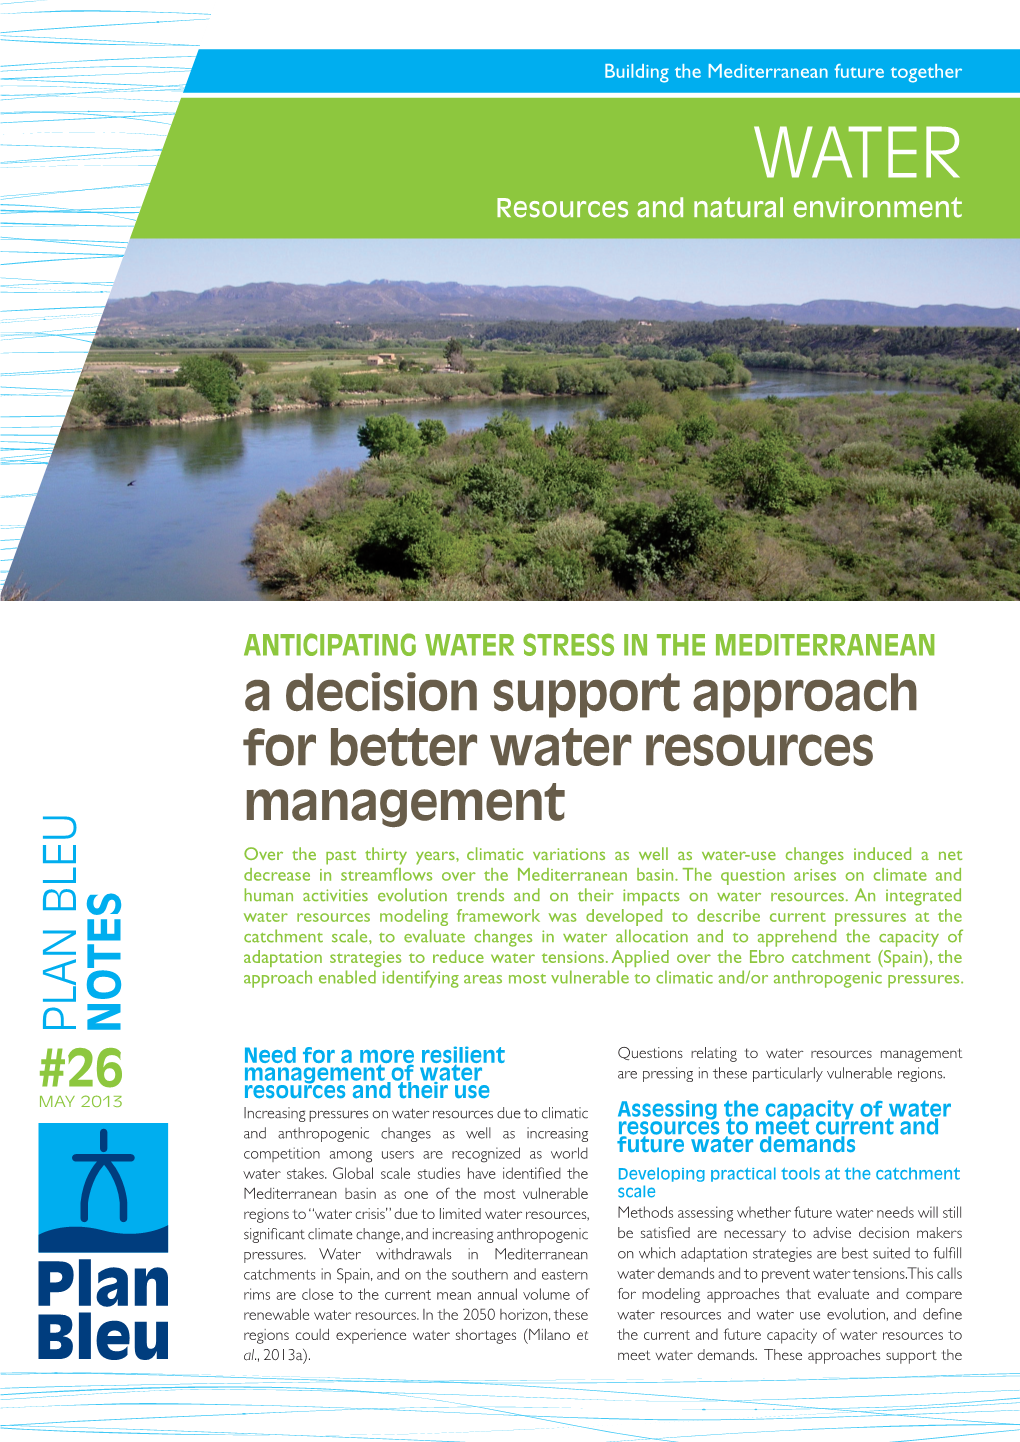 A Decision Support Approach for Better Water Resources Management